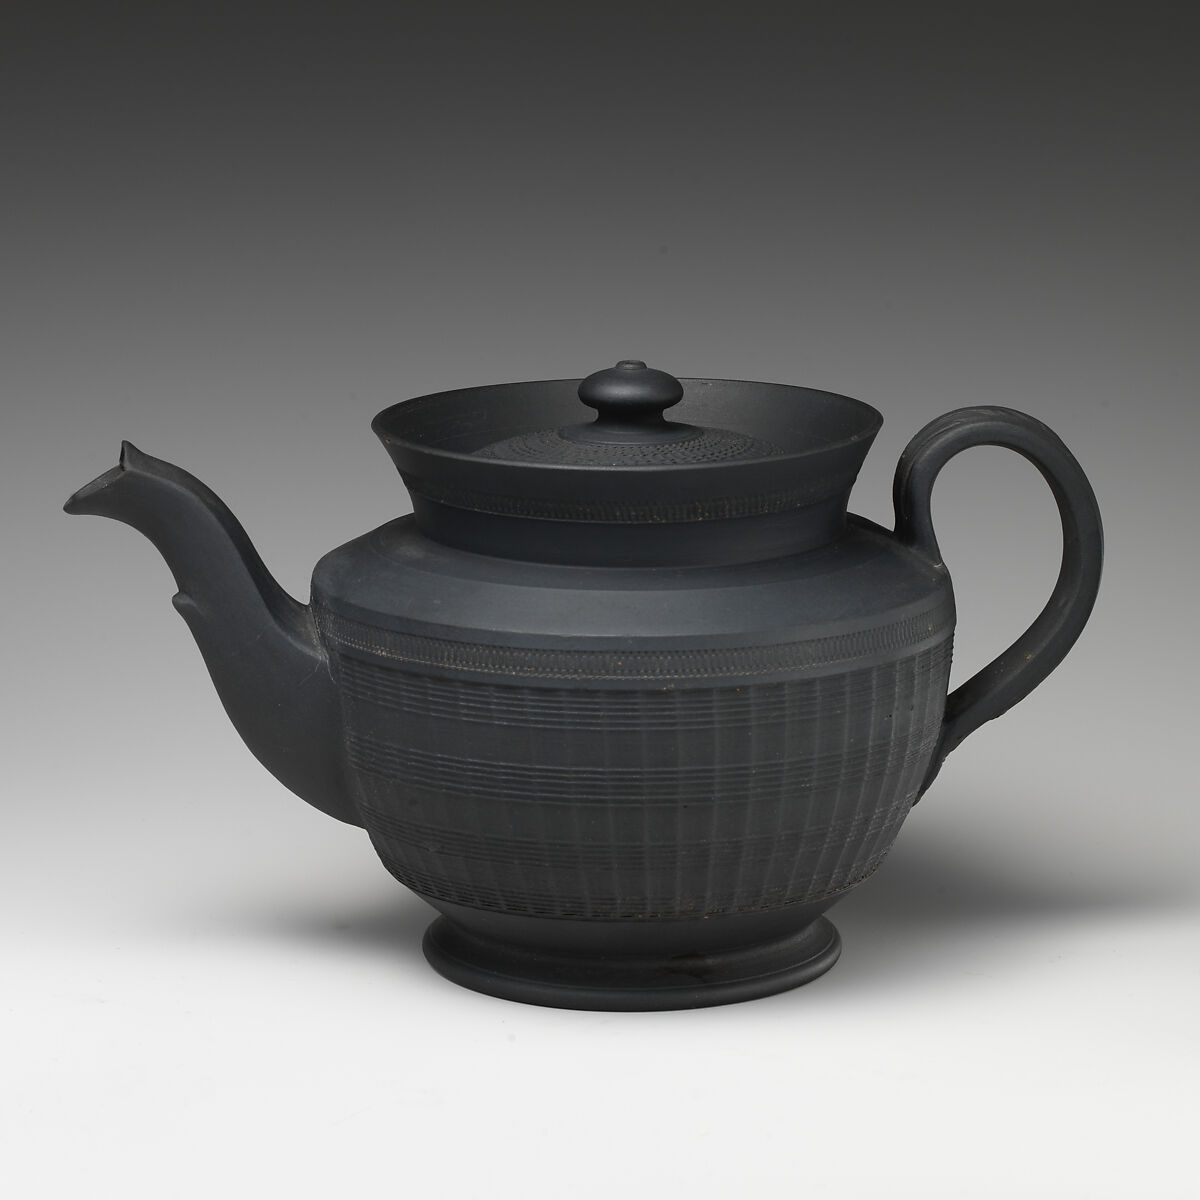 Teapot with cover, Black basalt ware, British 